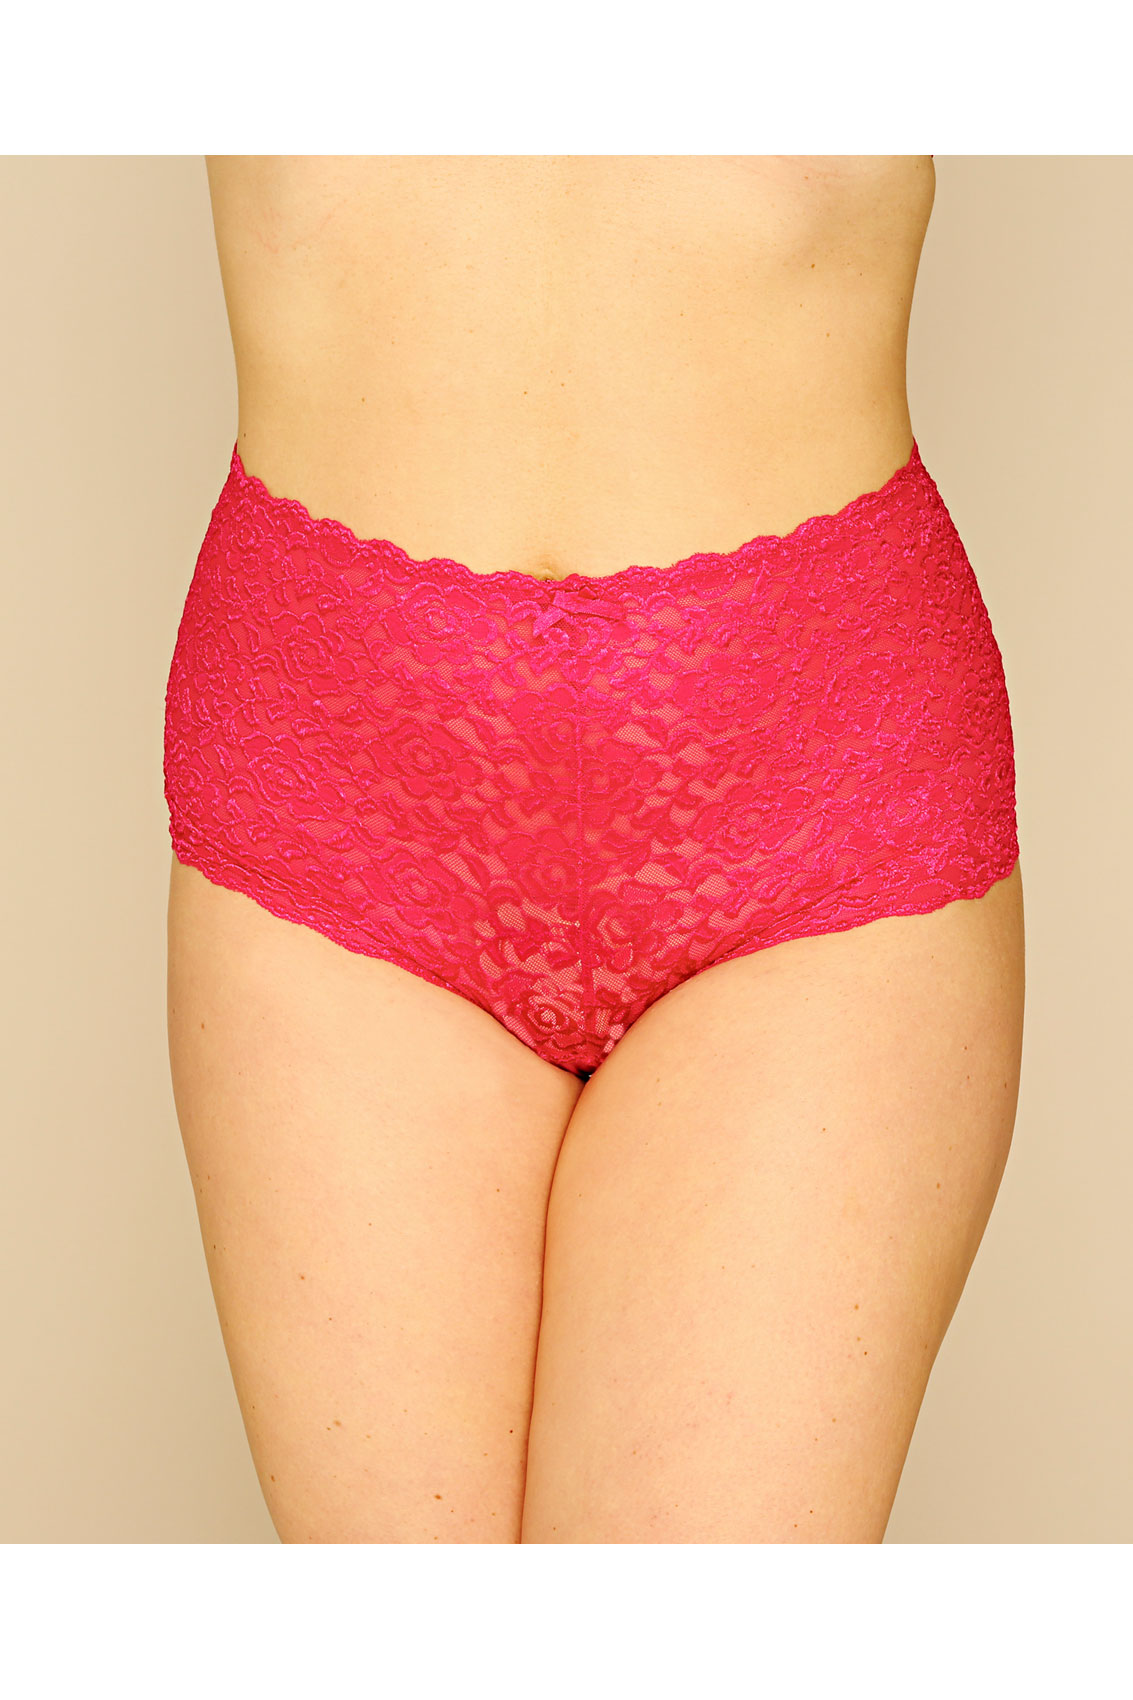 Hot Pink Shine Lace Shorts Plus Size 14 To 32